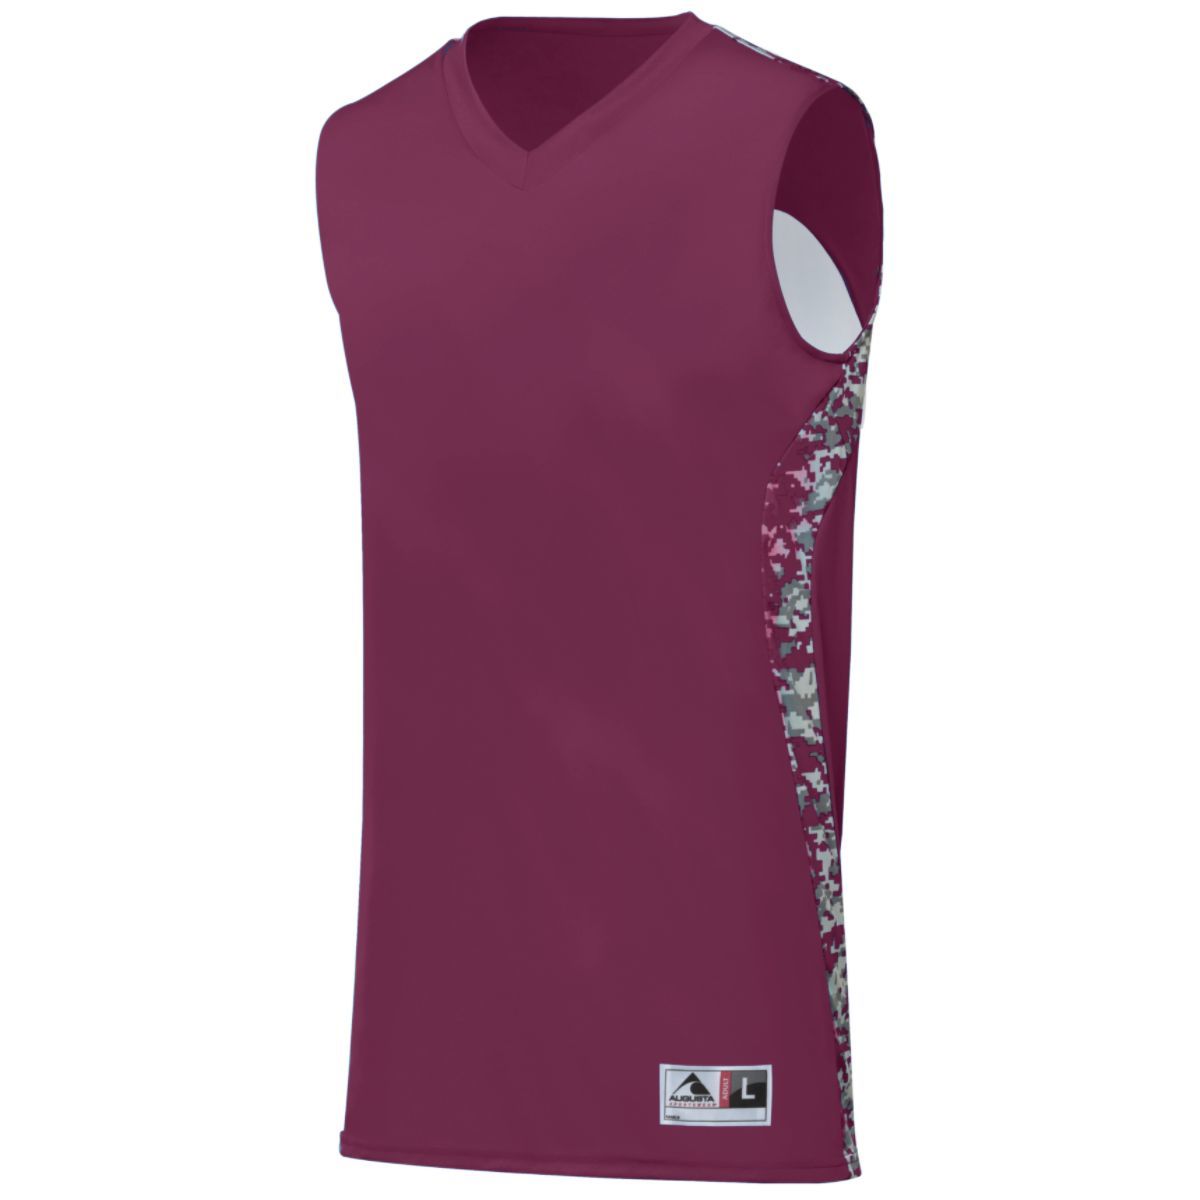 Augusta Sportswear Youth Hook Shot Reversible Jersey in Maroon/Maroon Digi  -Part of the Youth, Youth-Jersey, Augusta-Products, Basketball, Shirts, All-Sports, All-Sports-1 product lines at KanaleyCreations.com